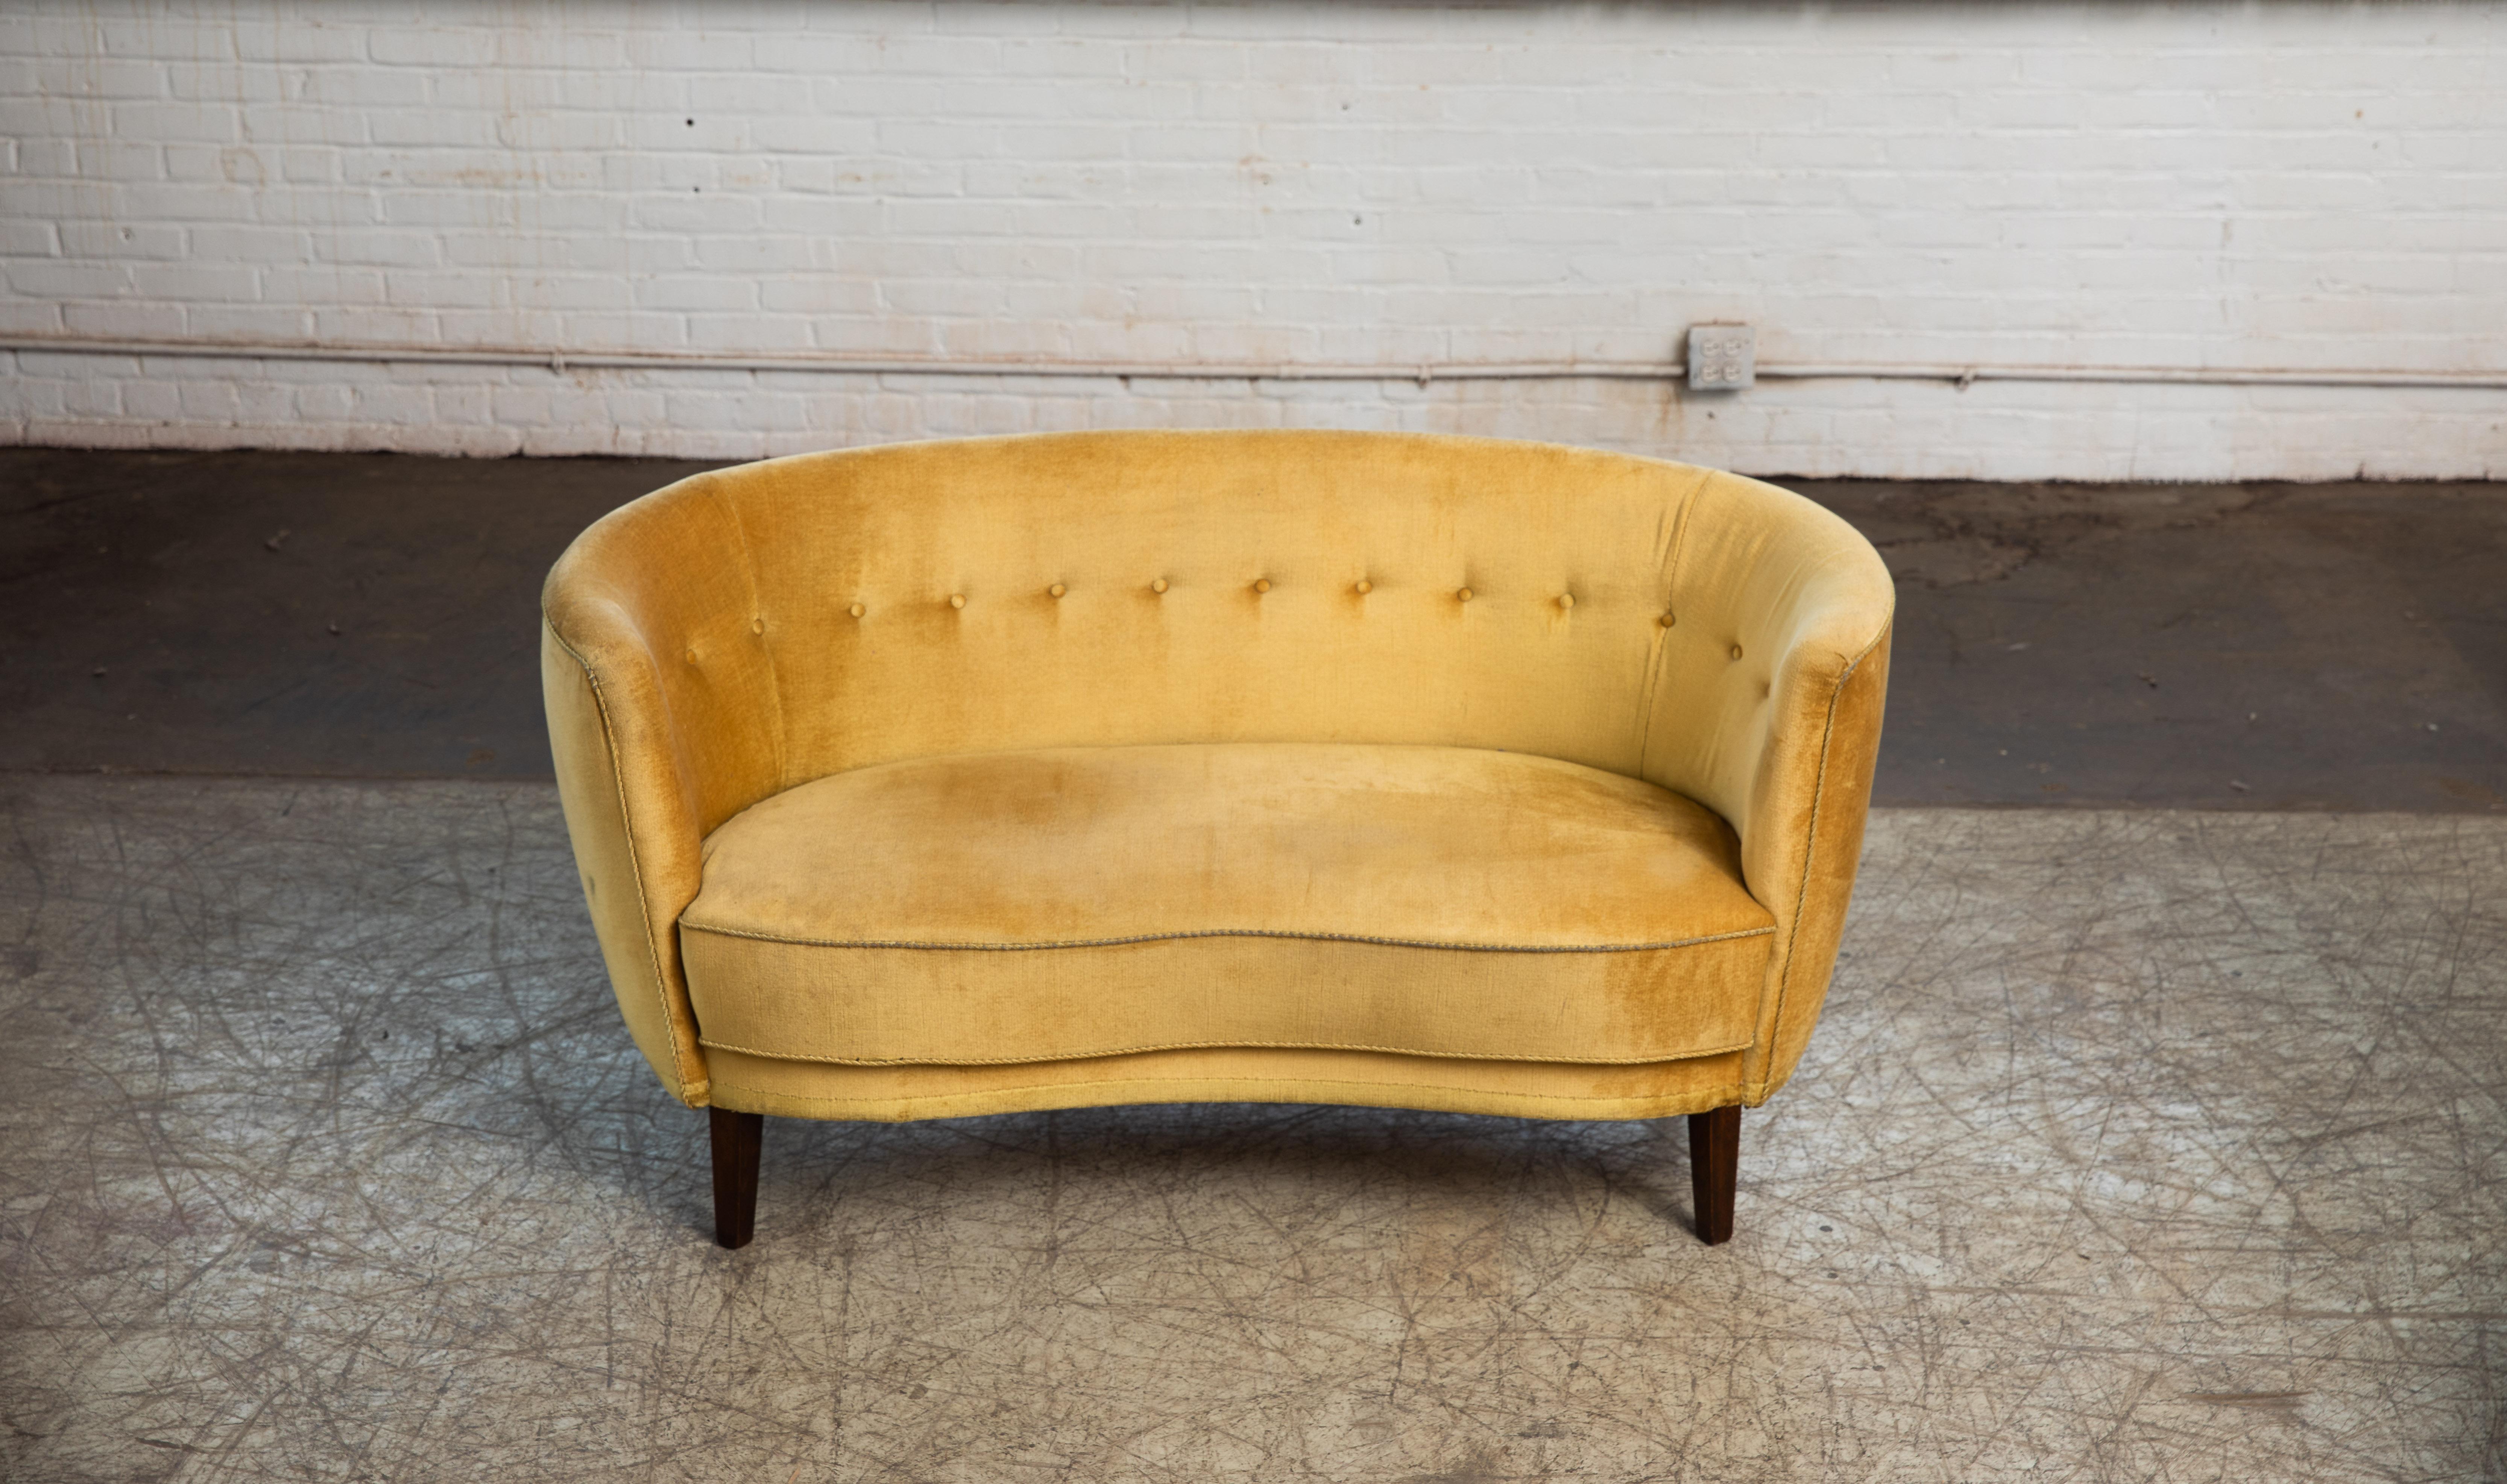 Viggo Boesen style banana shaped or curved Loveseat made in Denmark, circa 1940. This small sofa will make a nice presence t in any room. Beautiful round voluptuous lines on tall elegant legs. Original yellow mohair fabric is in usable condition.